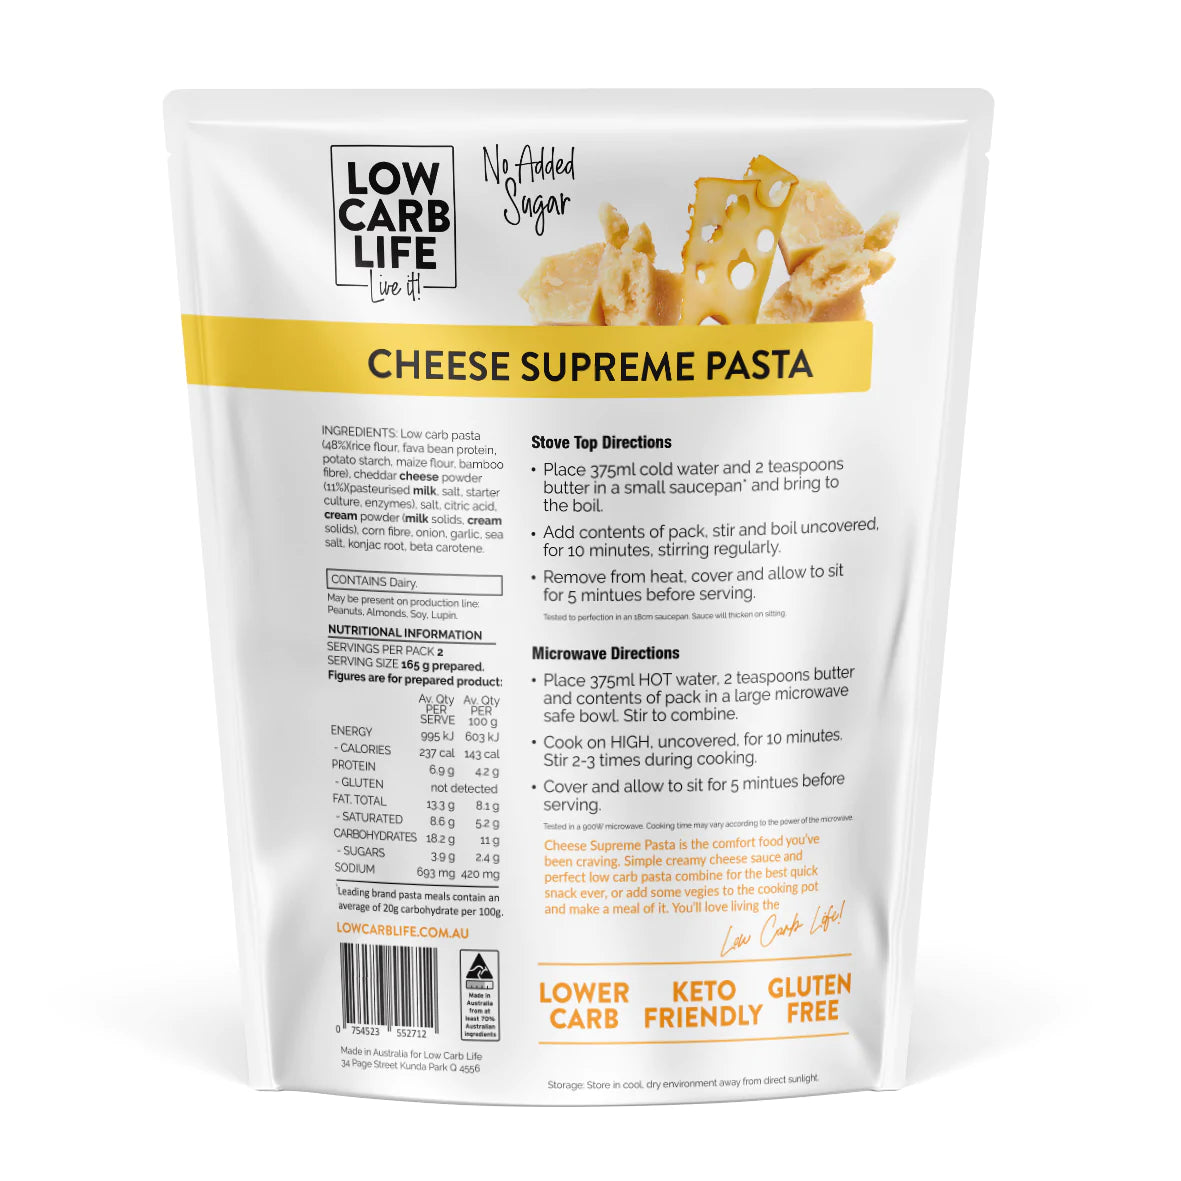 Low Carb Life One Pot Pasta 90g, Cheese Supreme Flavour